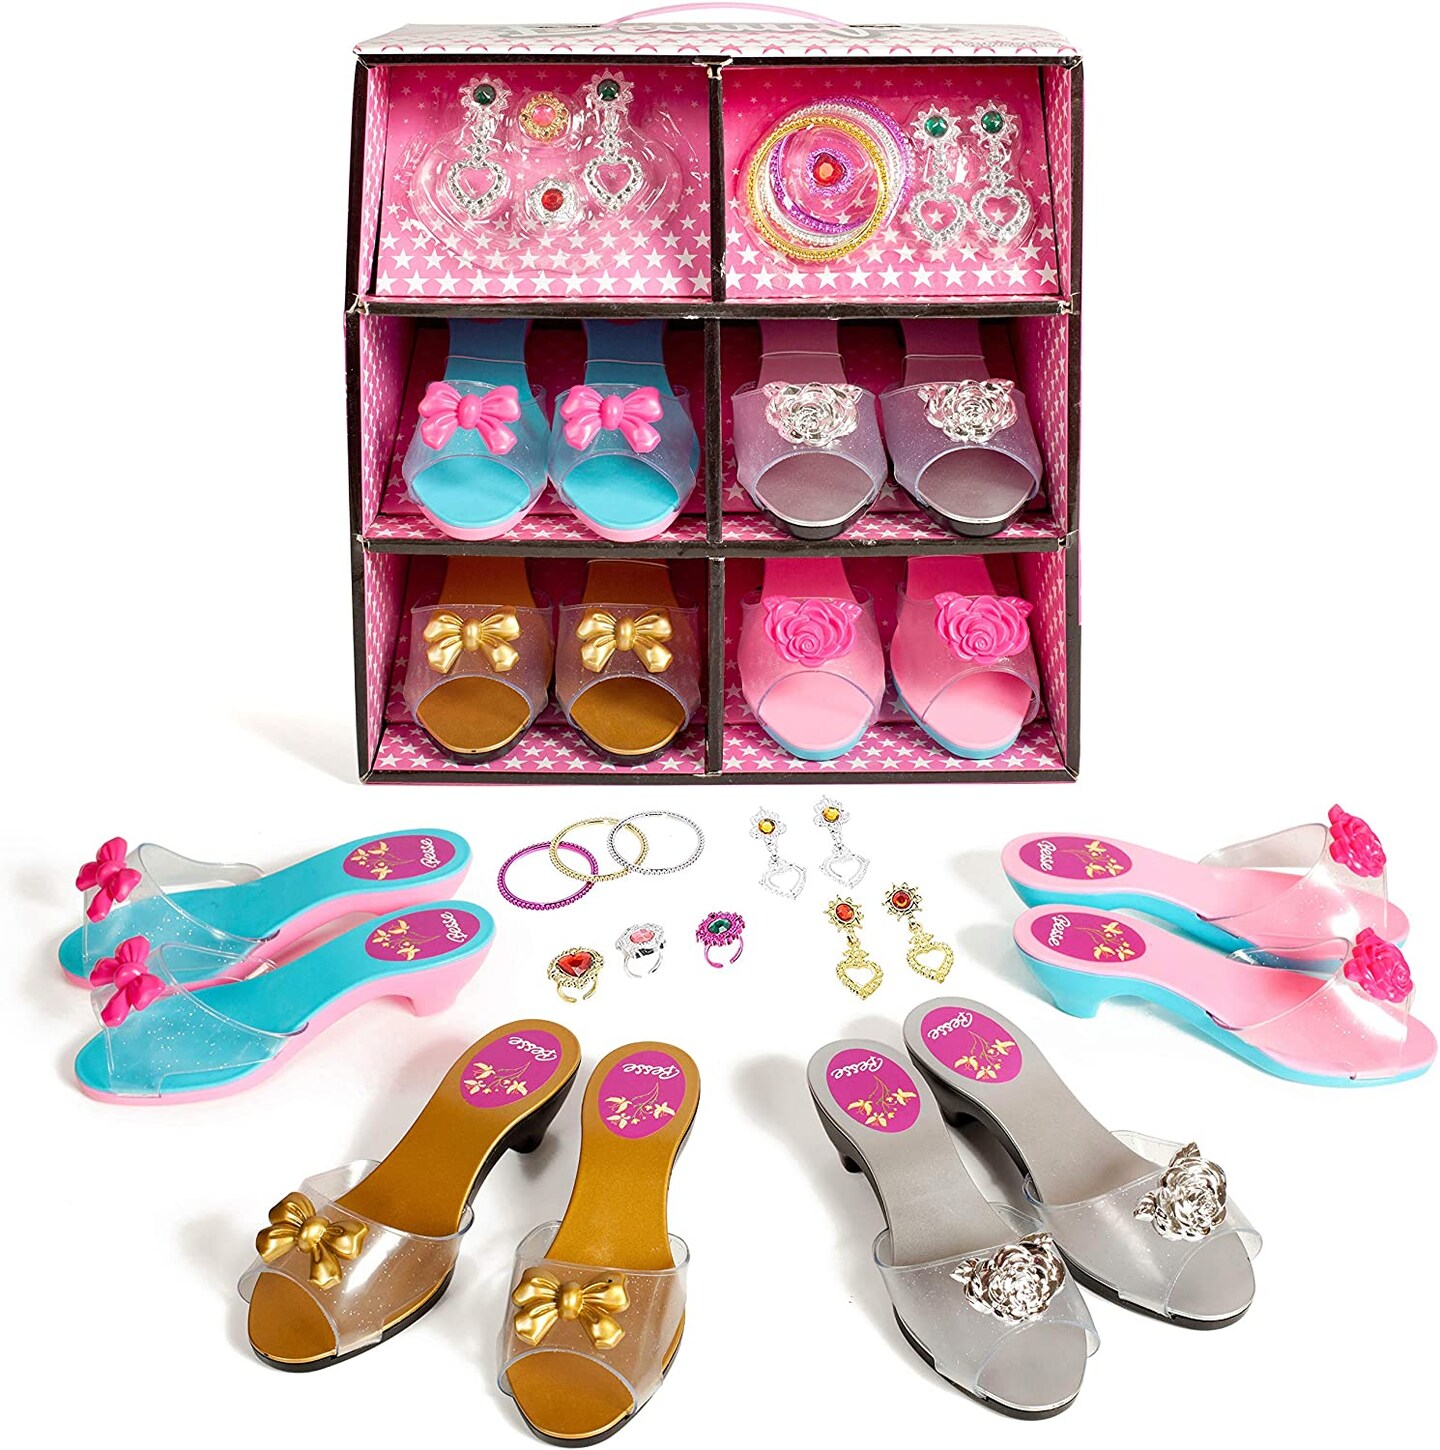  Girls' Costumes - Girls' Costumes / Girls' Costumes &  Accessories: Clothing, Shoes & Jewelry